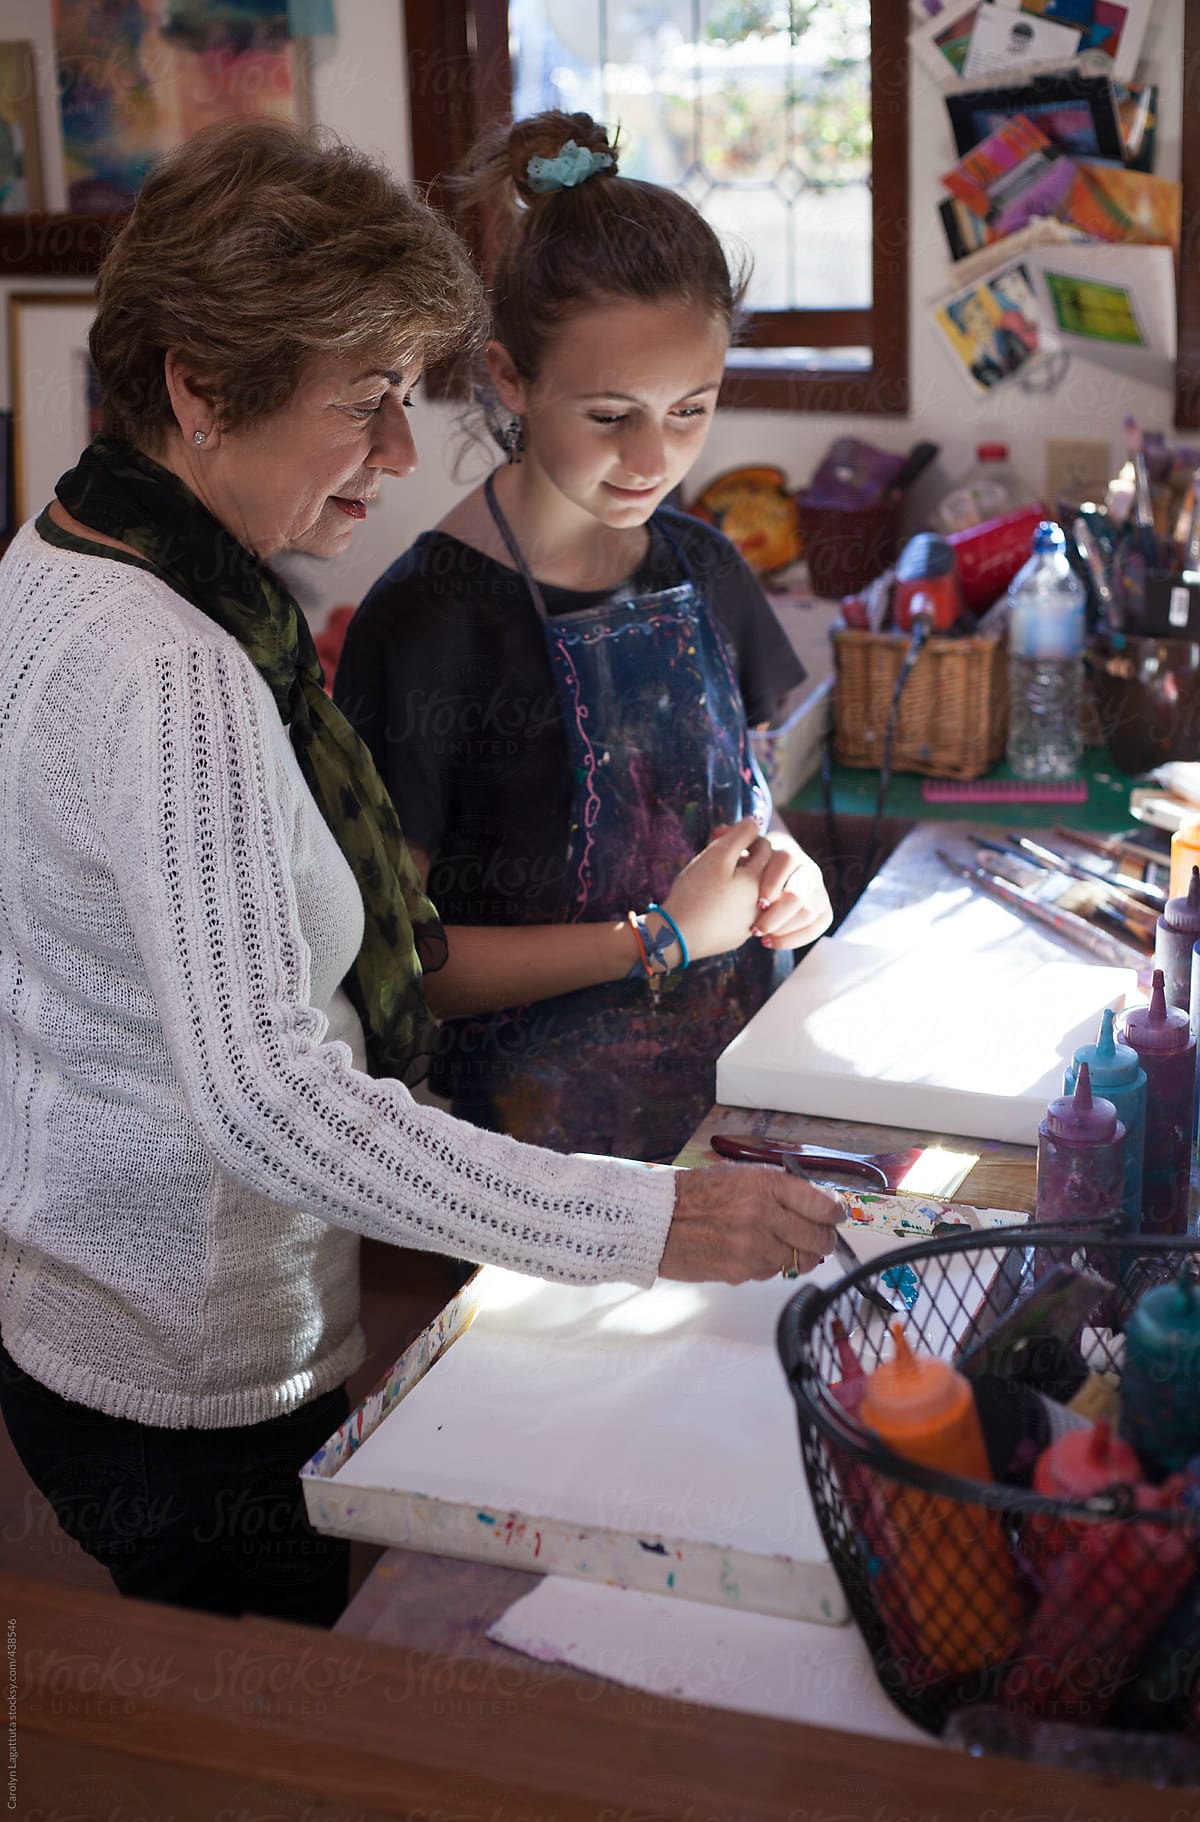 Teen girl and her grandmother having an art lesson in their home studio